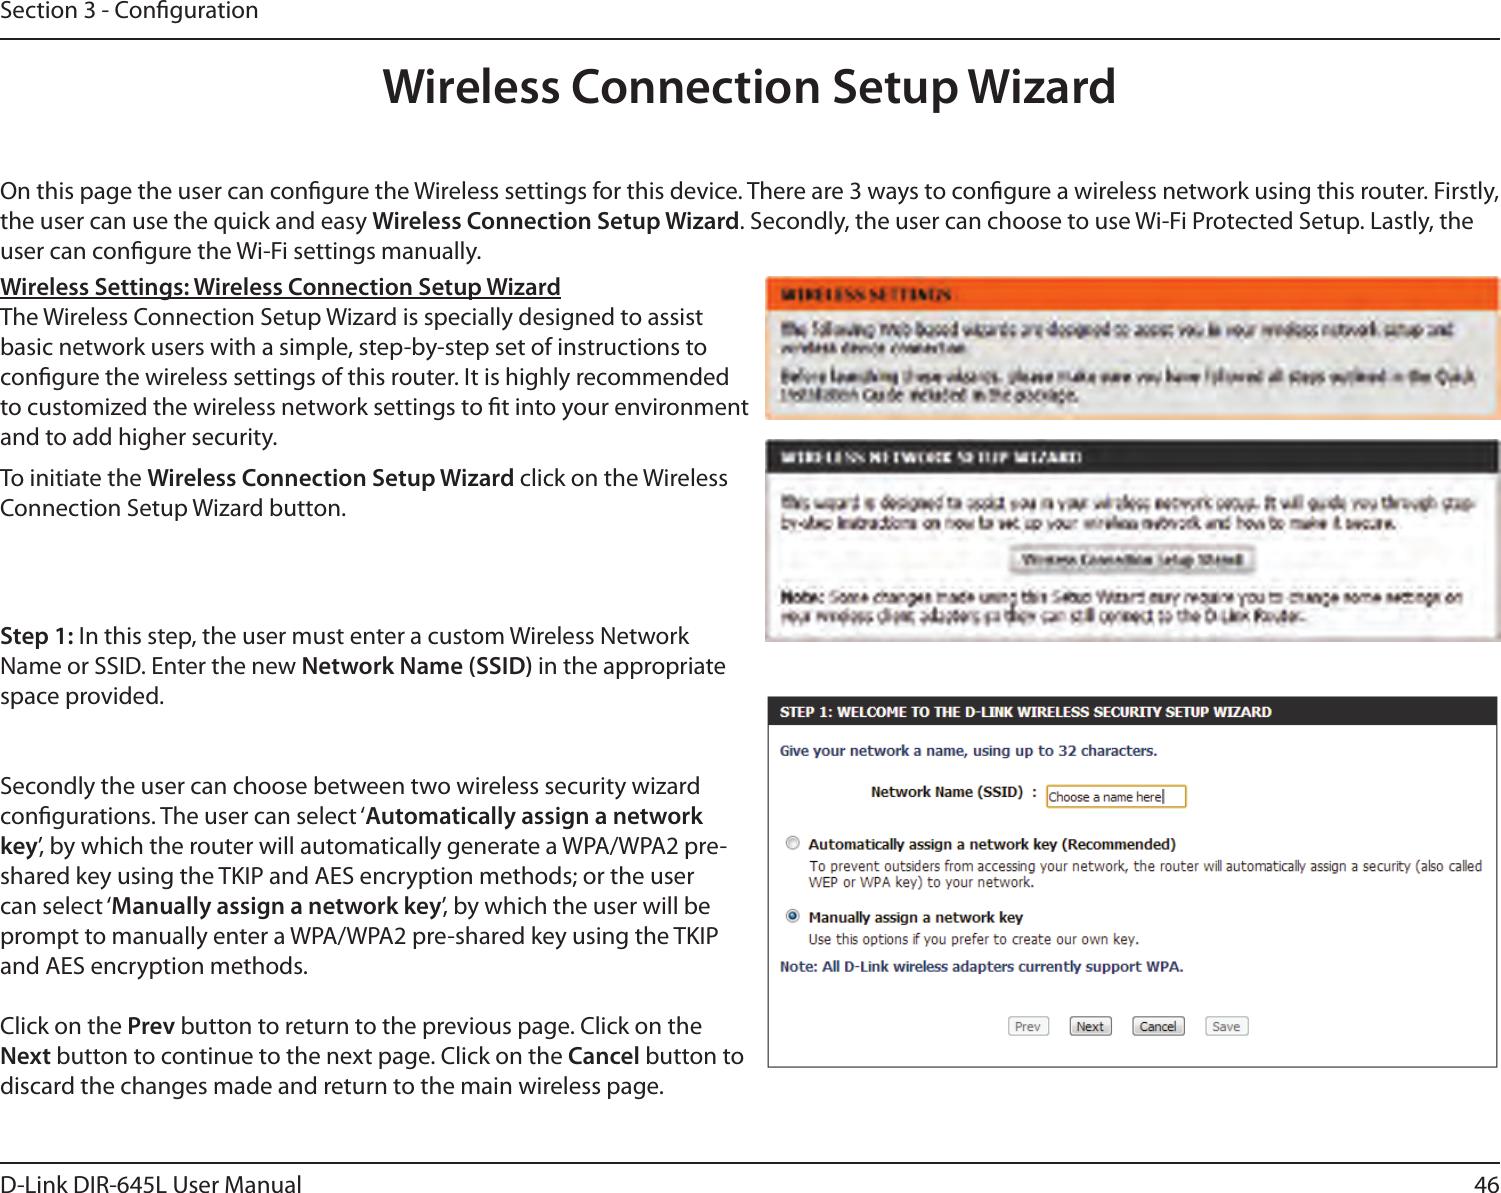 46D-Link DIR-645L User ManualSection 3 - CongurationOn this page the user can congure the Wireless settings for this device. There are 3 ways to congure a wireless network using this router. Firstly, the user can use the quick and easy Wireless Connection Setup Wizard. Secondly, the user can choose to use Wi-Fi Protected Setup. Lastly, the user can congure the Wi-Fi settings manually.Wireless Settings: Wireless Connection Setup WizardThe Wireless Connection Setup Wizard is specially designed to assist basic network users with a simple, step-by-step set of instructions to congure the wireless settings of this router. It is highly recommended to customized the wireless network settings to t into your environment and to add higher security.Step 1: In this step, the user must enter a custom Wireless Network Name or SSID. Enter the new Network Name (SSID) in the appropriate space provided. Secondly the user can choose between two wireless security wizard congurations. The user can select ‘Automatically assign a network key’, by which the router will automatically generate a WPA/WPA2 pre-shared key using the TKIP and AES encryption methods; or the user can select ‘Manually assign a network key’, by which the user will be prompt to manually enter a WPA/WPA2 pre-shared key using the TKIP and AES encryption methods.Click on the Prev button to return to the previous page. Click on the Next button to continue to the next page. Click on the Cancel button to discard the changes made and return to the main wireless page.To initiate the Wireless Connection Setup Wizard click on the Wireless Connection Setup Wizard button.Wireless Connection Setup Wizard